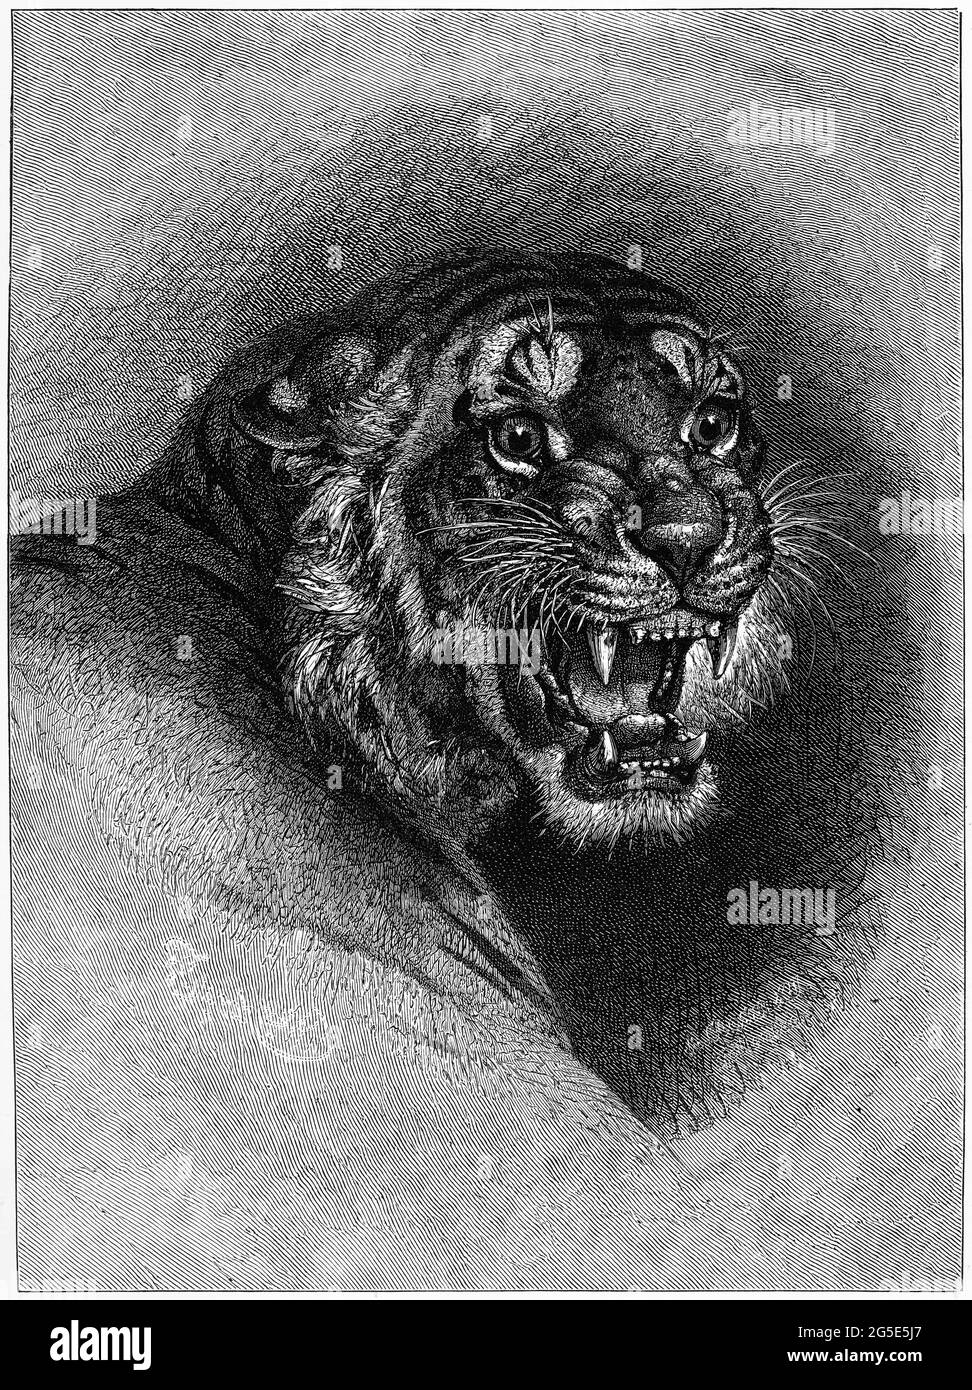 Engraving of an angry, roaring tiger Stock Photo